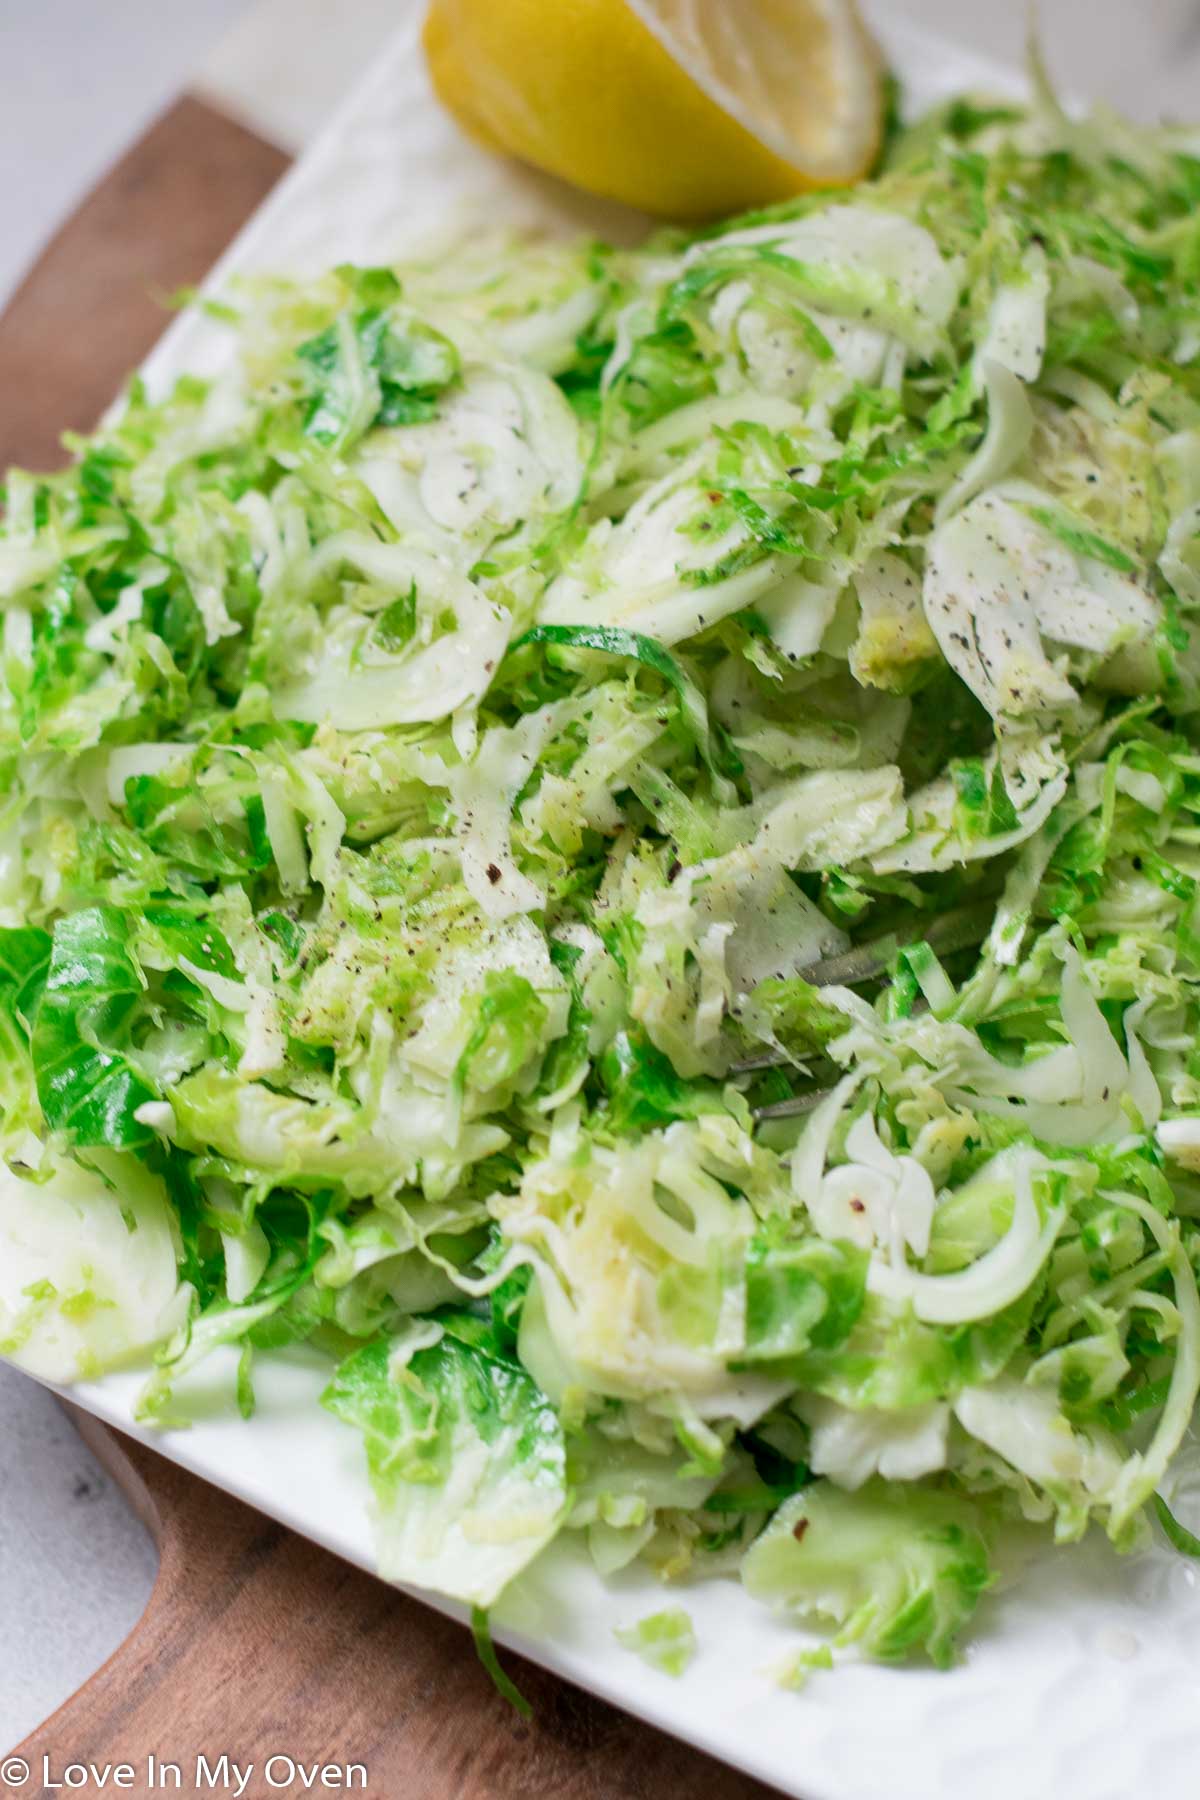 sautéed shredded brussels sprouts